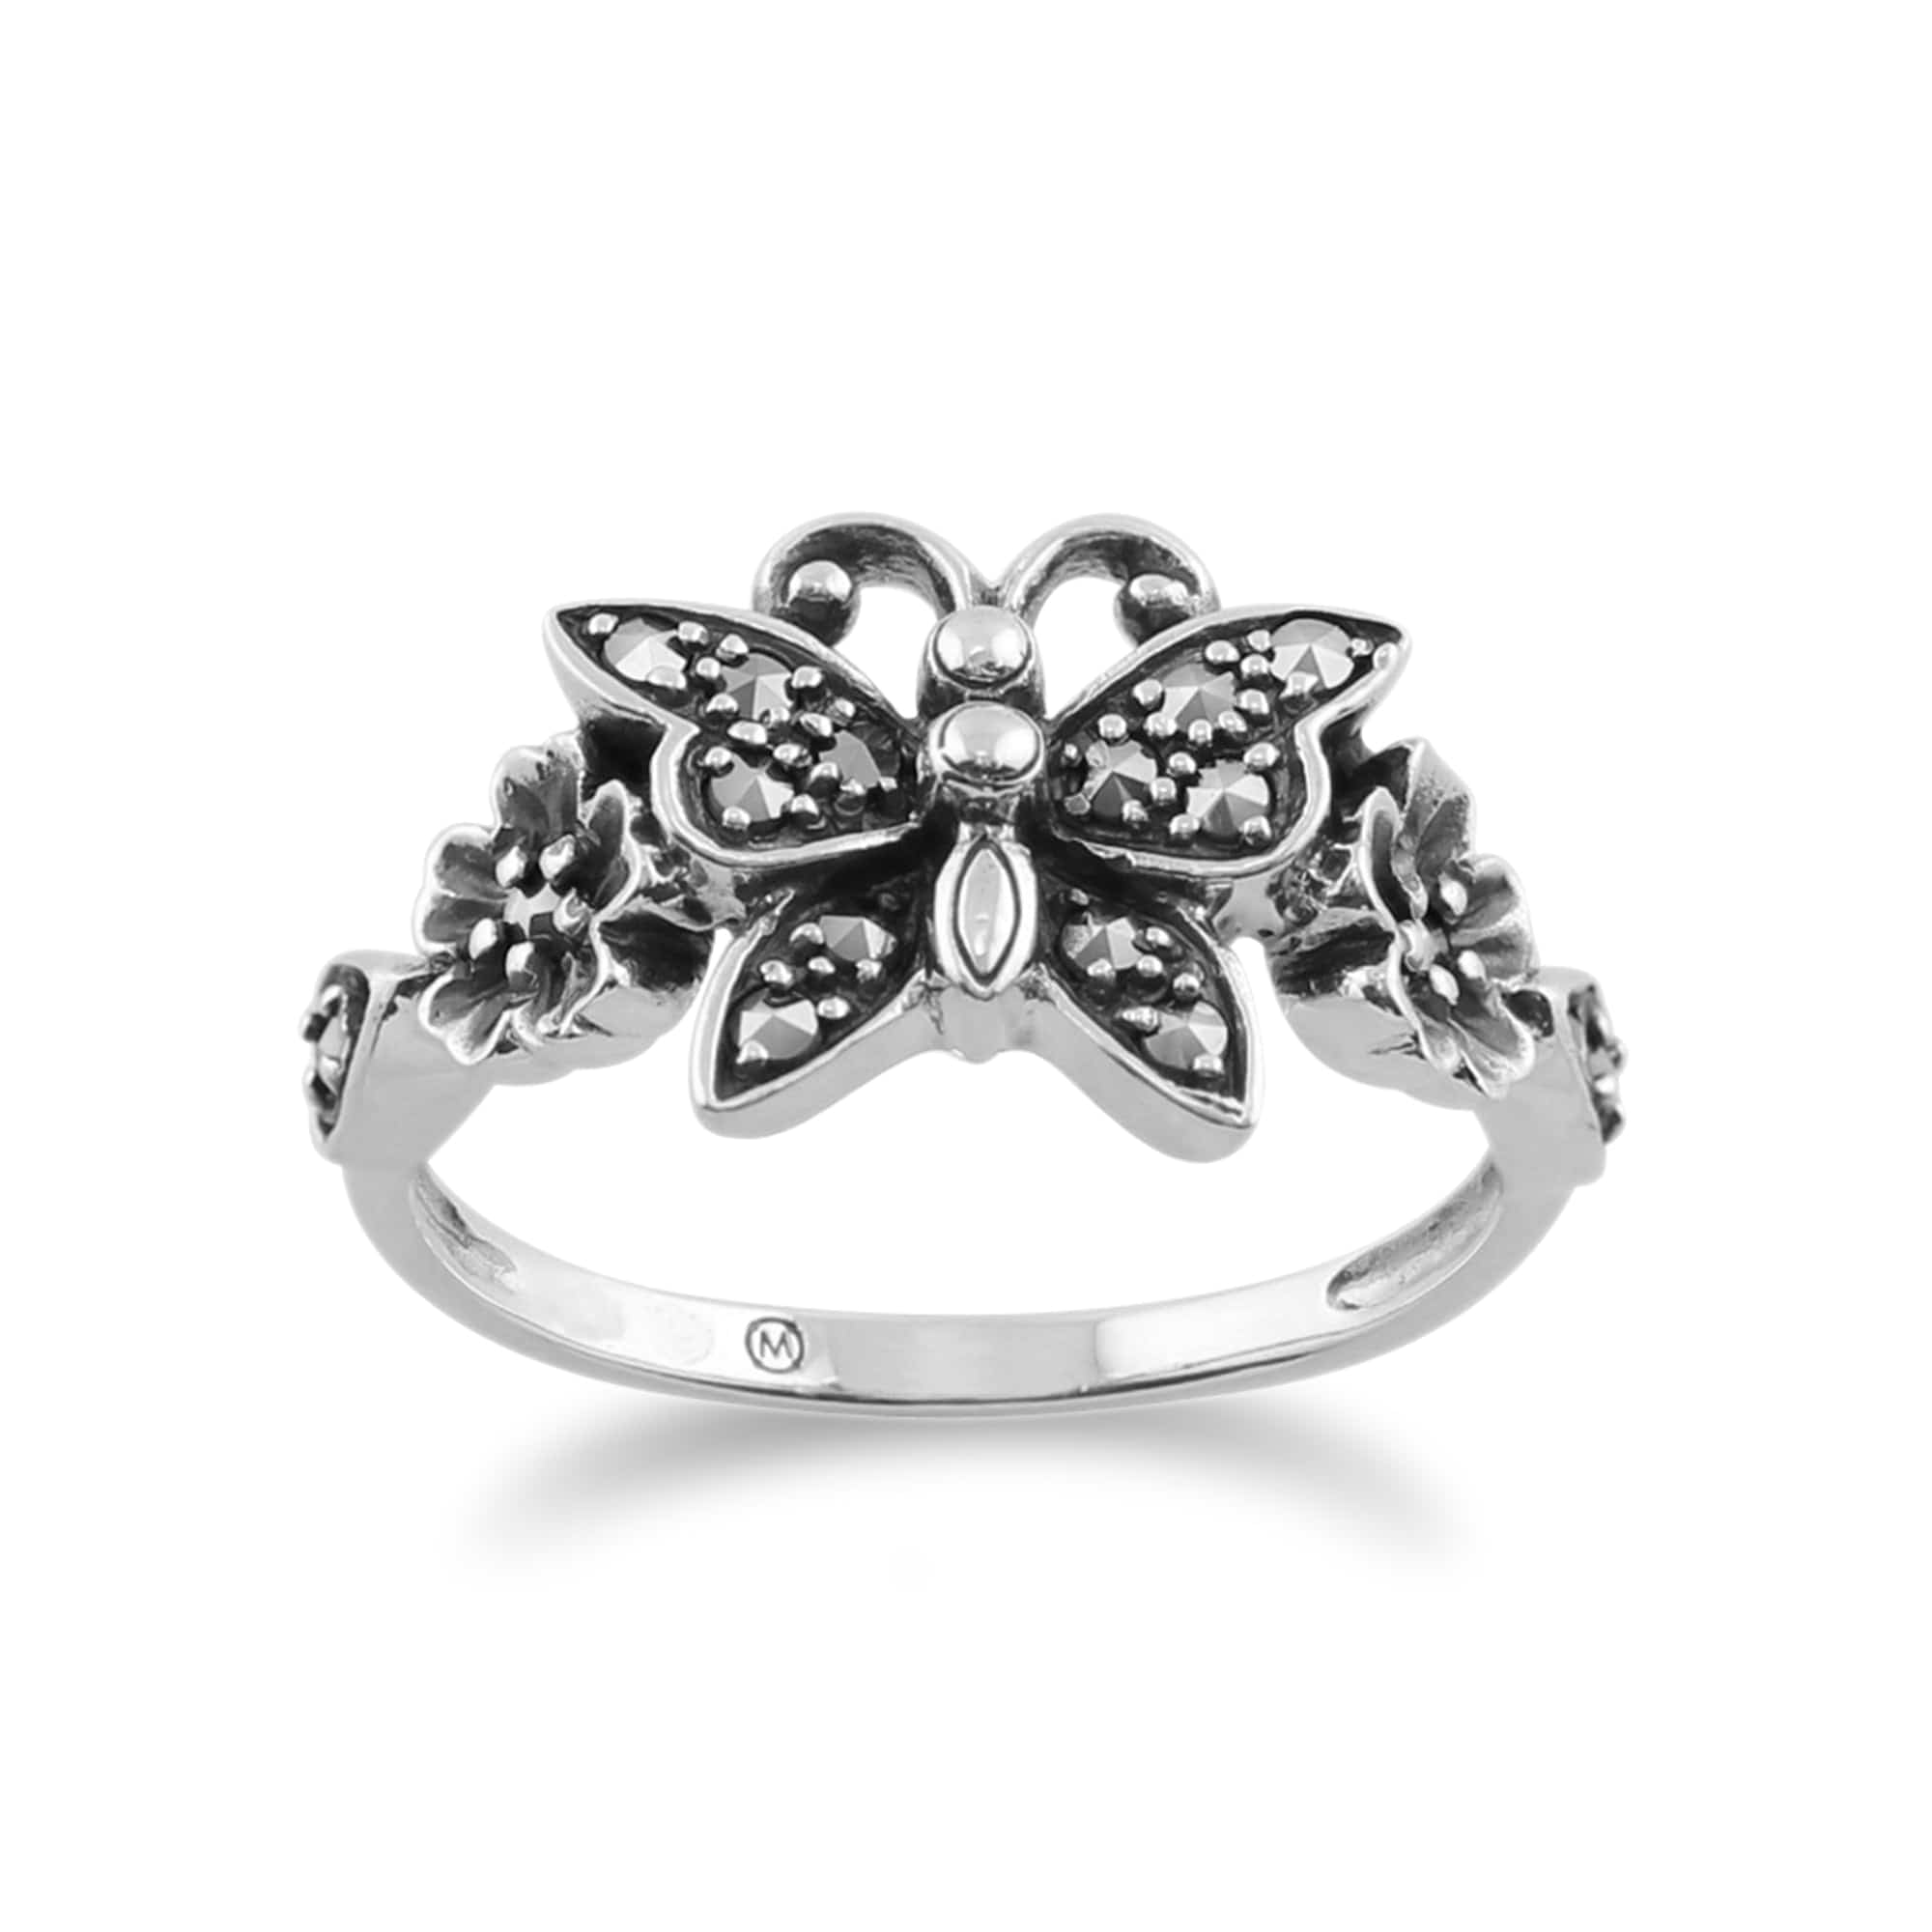 Art Nouveau Style Round Marcasite Butterfly Ring in 925 Sterling Silver - Gemondo